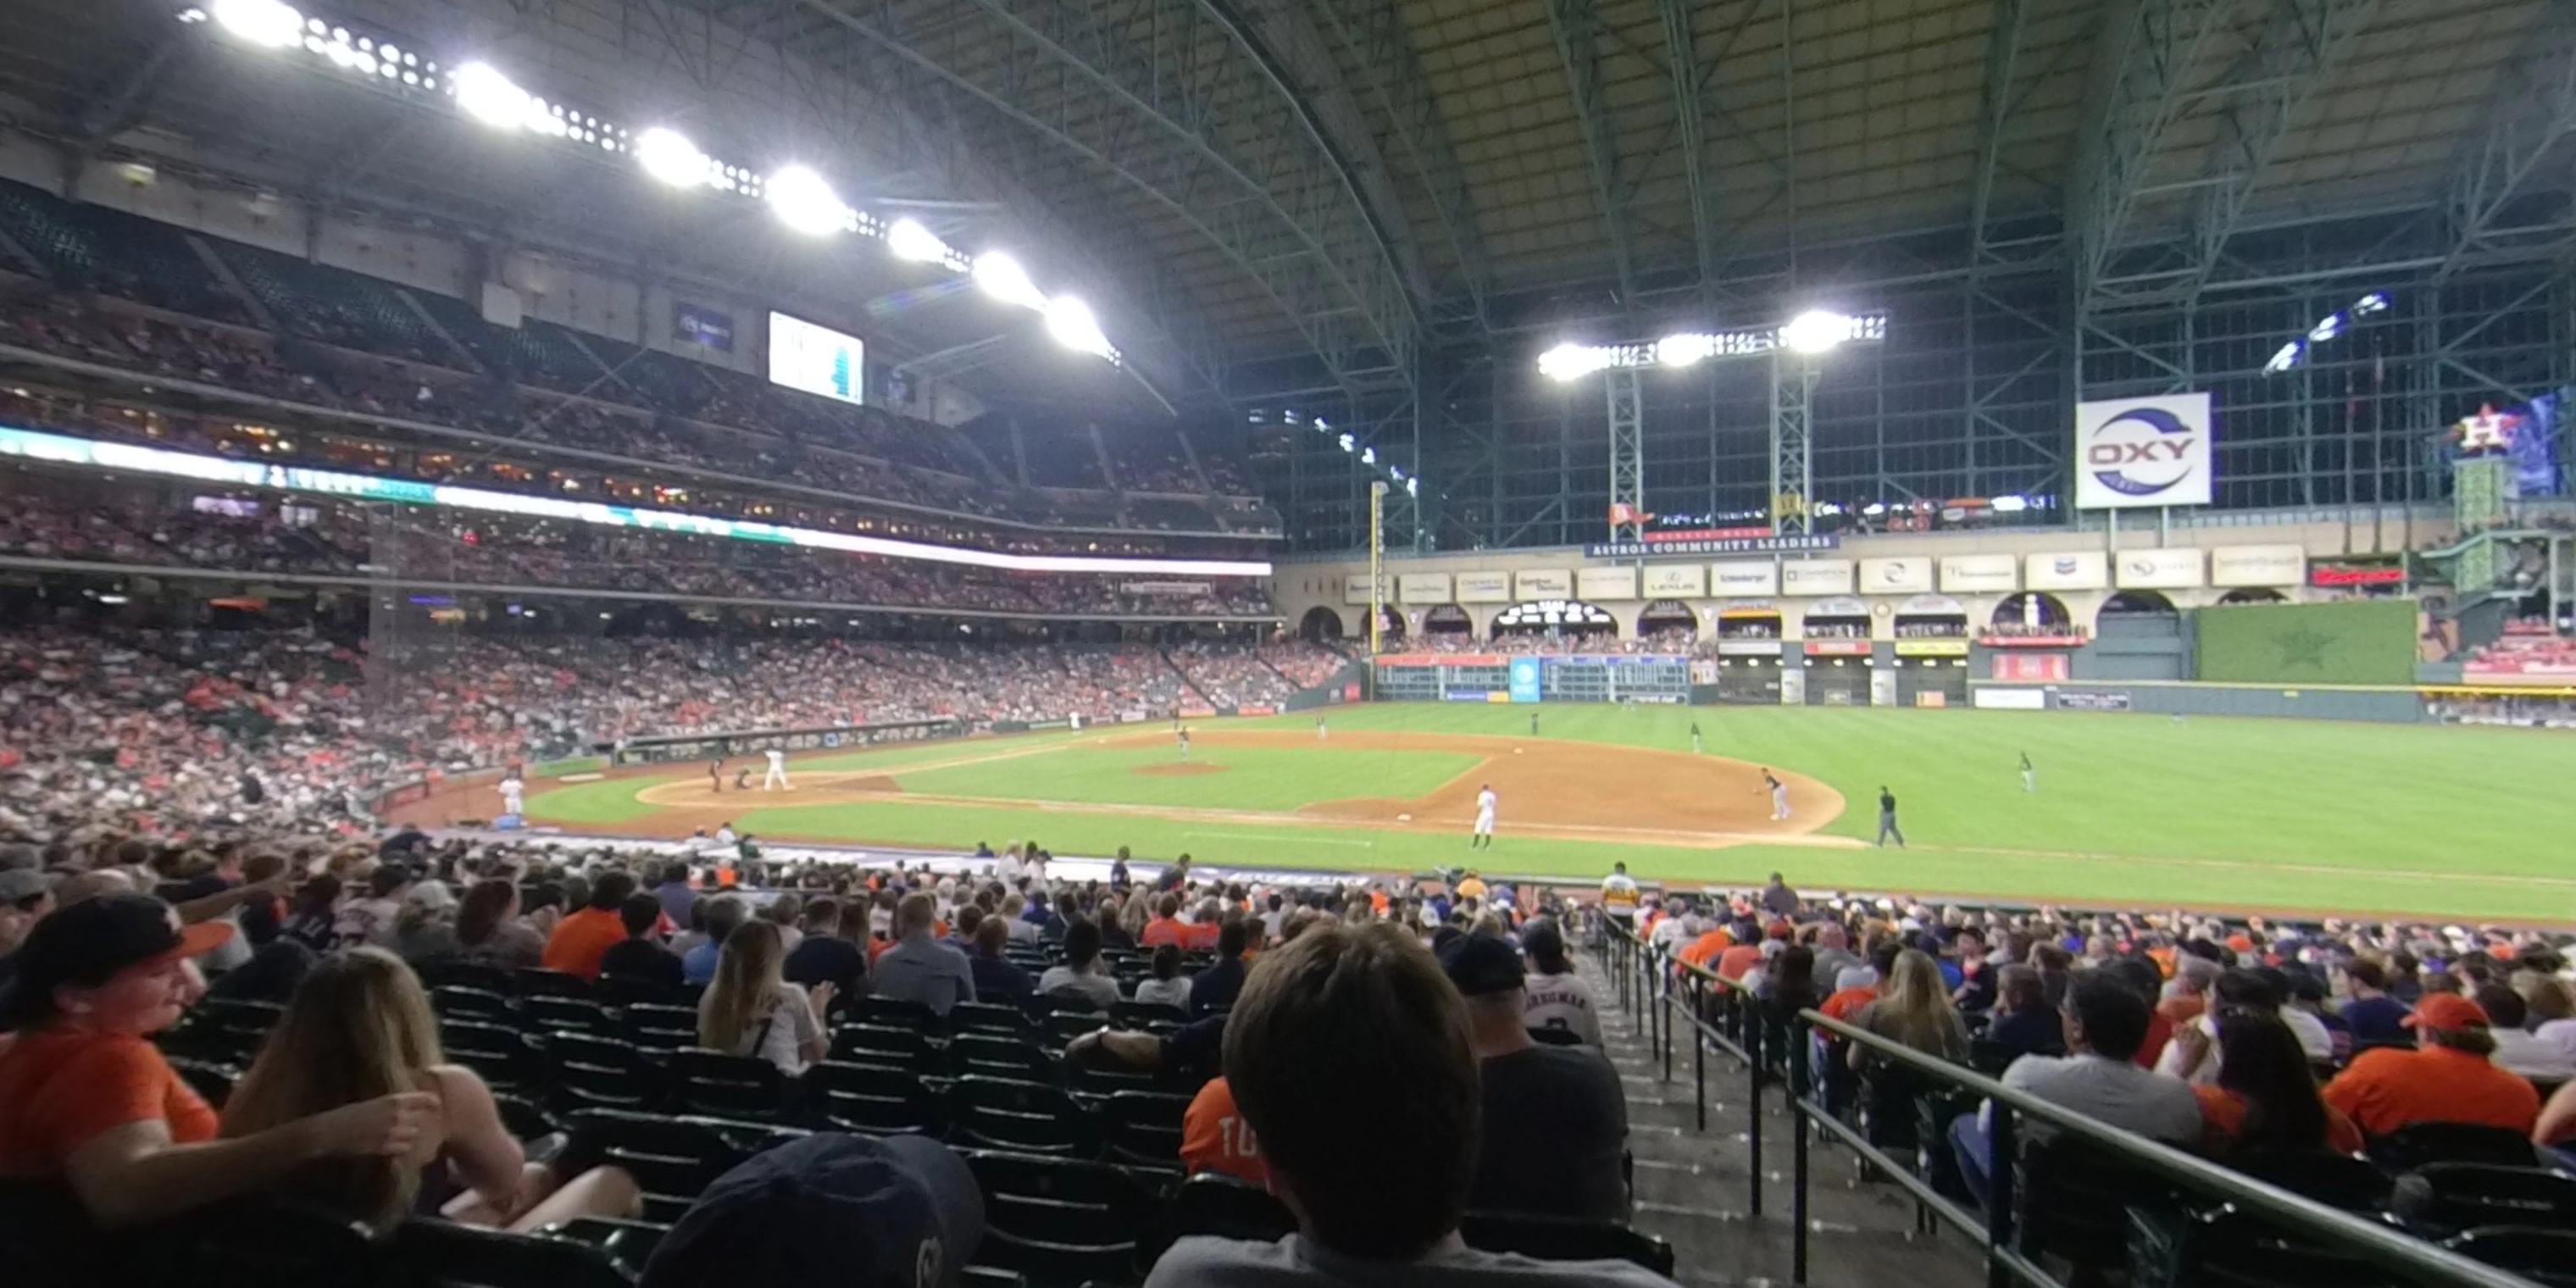 section 126 panoramic seat view  for baseball - minute maid park